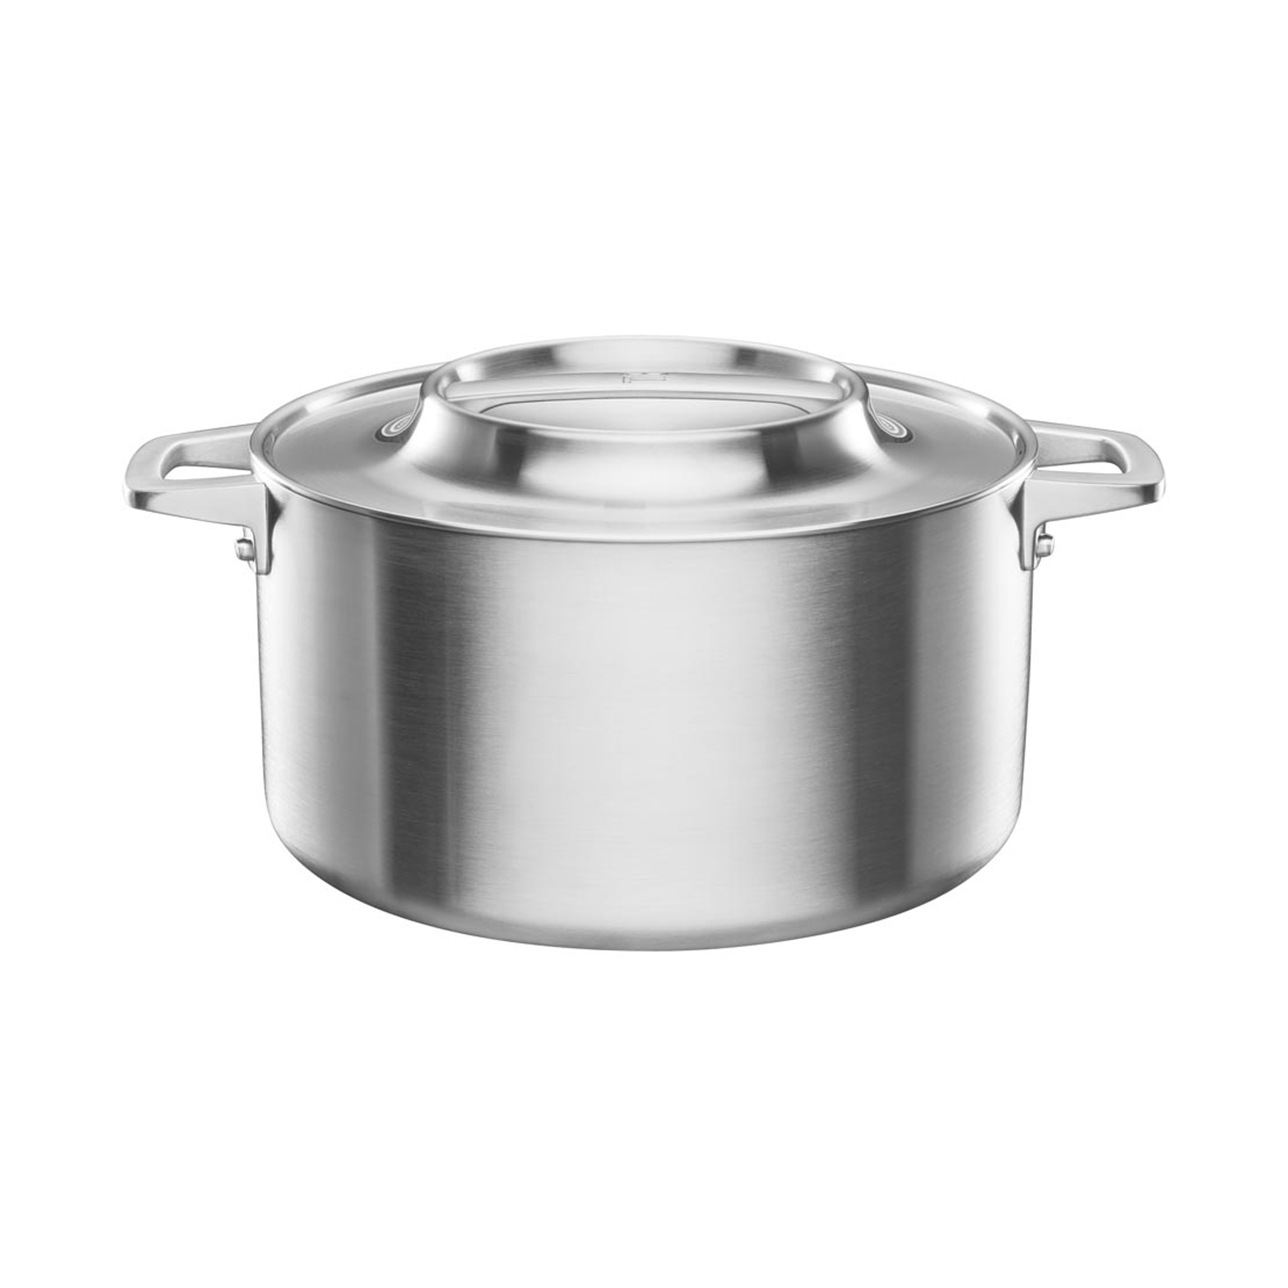 Norden Pot Uncoated Stainless Steel, 5 L